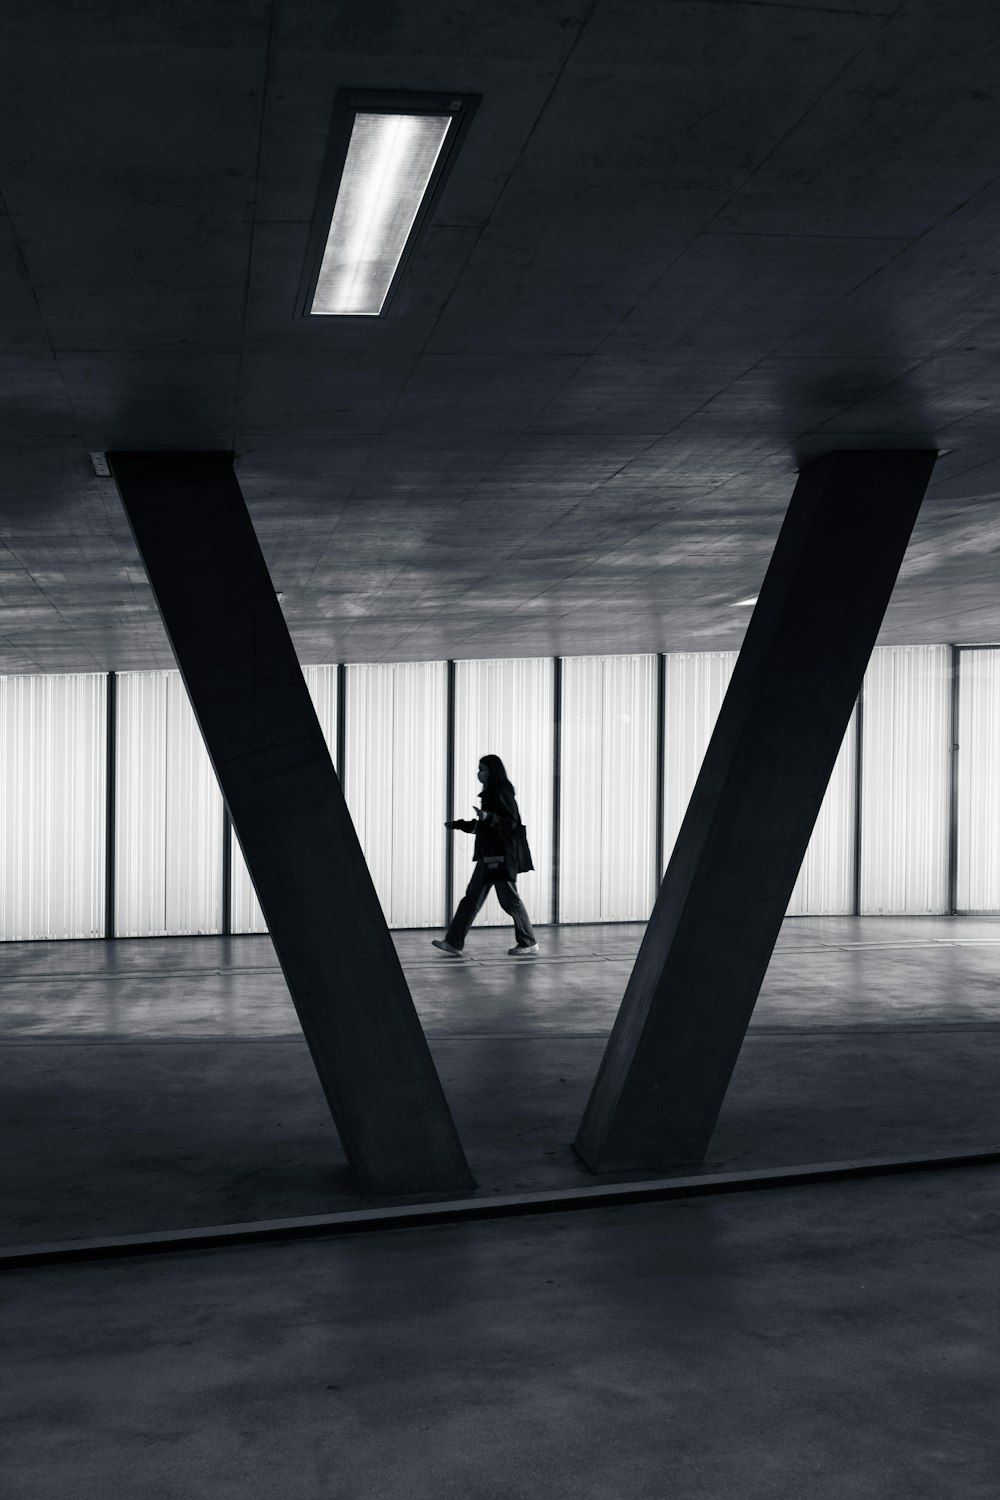 silhouette of 2 person walking on gray concrete floor